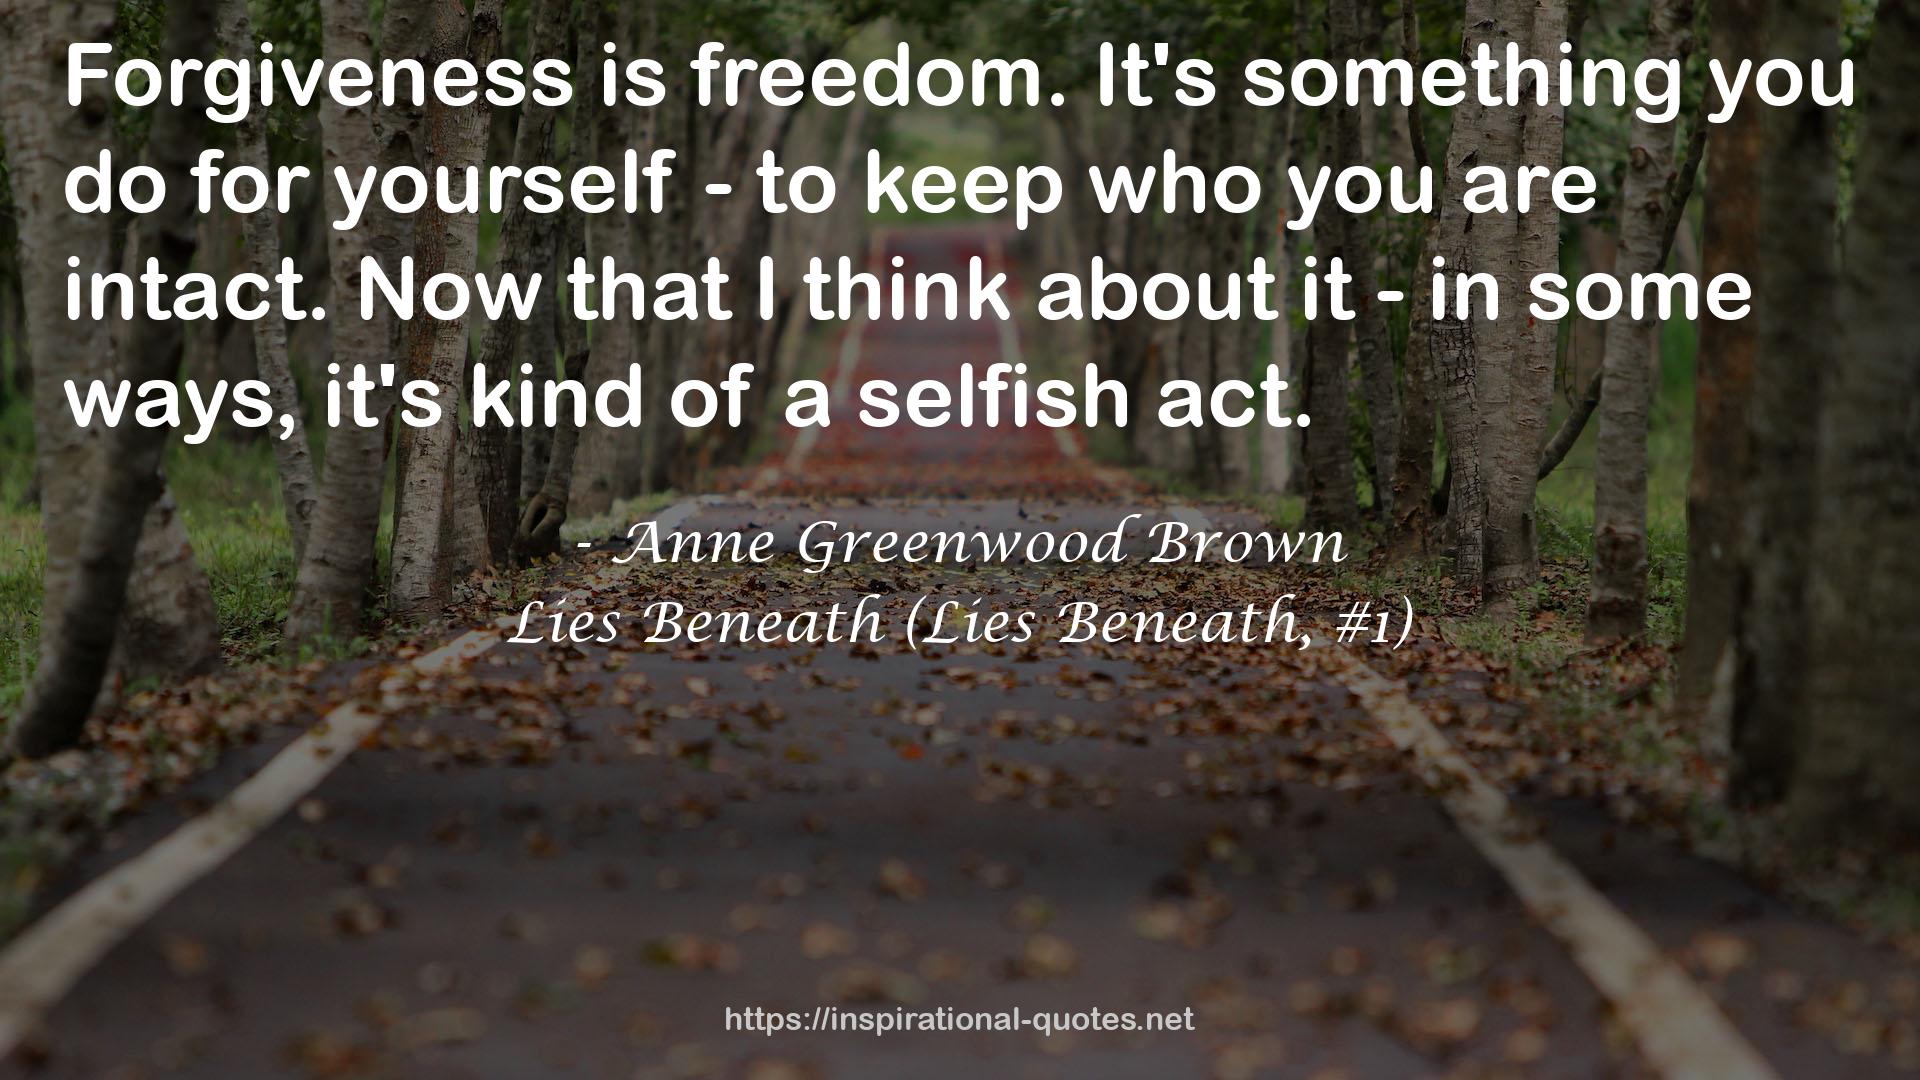 Anne Greenwood Brown QUOTES